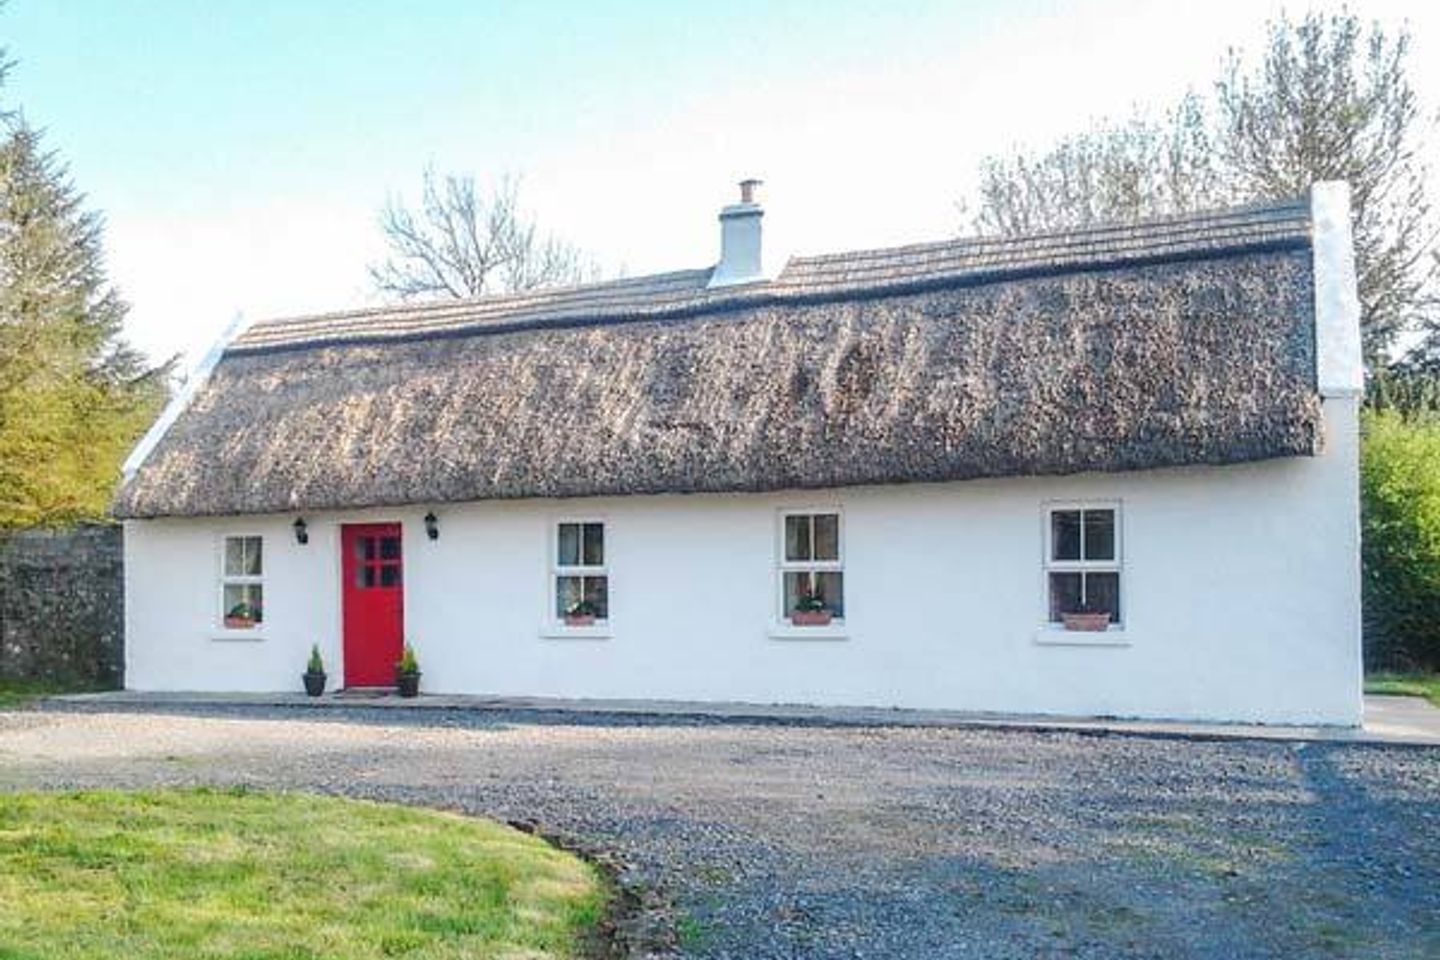 Ref. 934339 Forest View, Forest View, Carrowreagh, Castlerea, Co. Roscommon